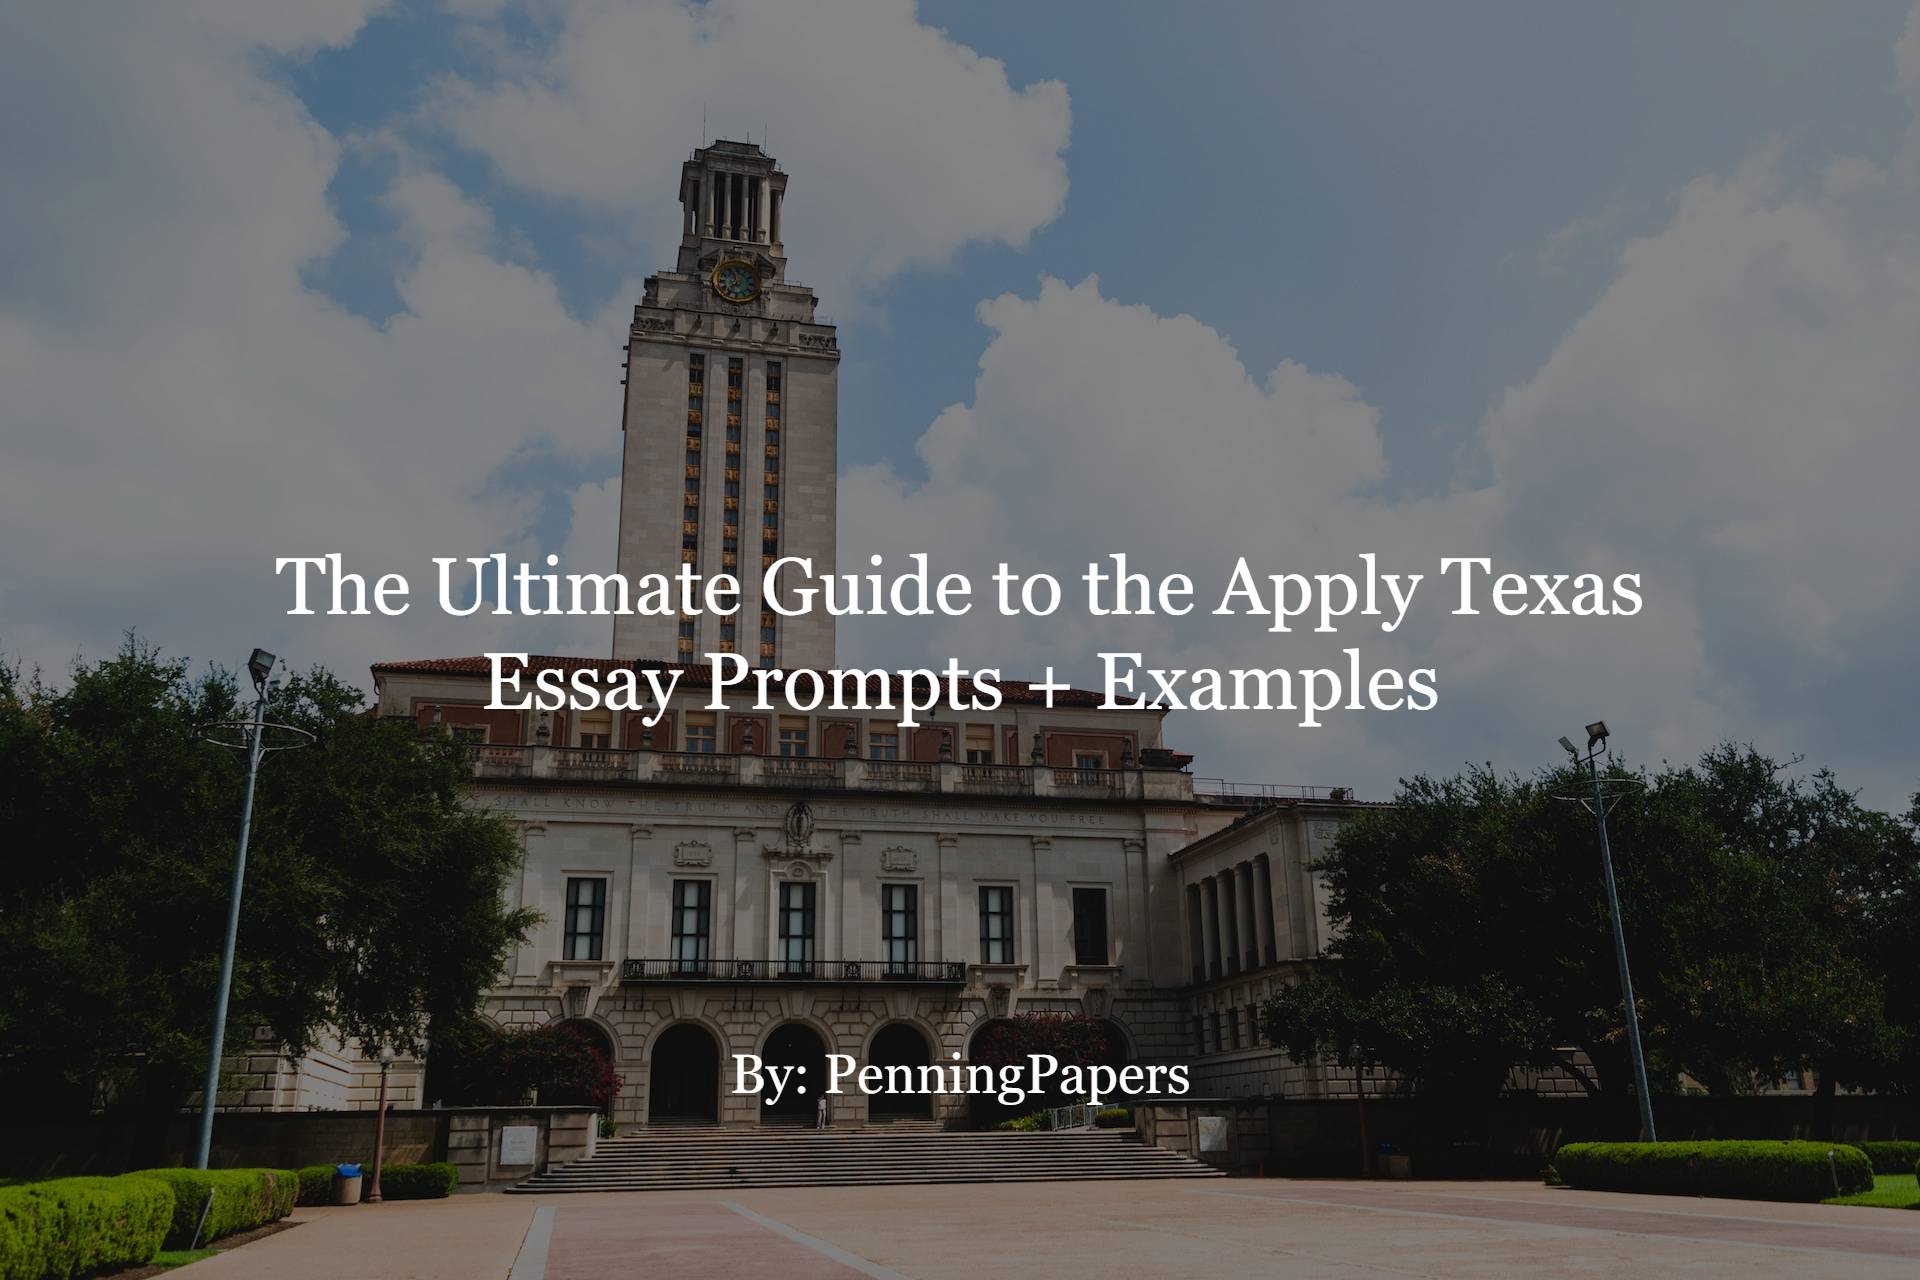 The Ultimate Guide to the Apply Texas Essay Prompts + Examples